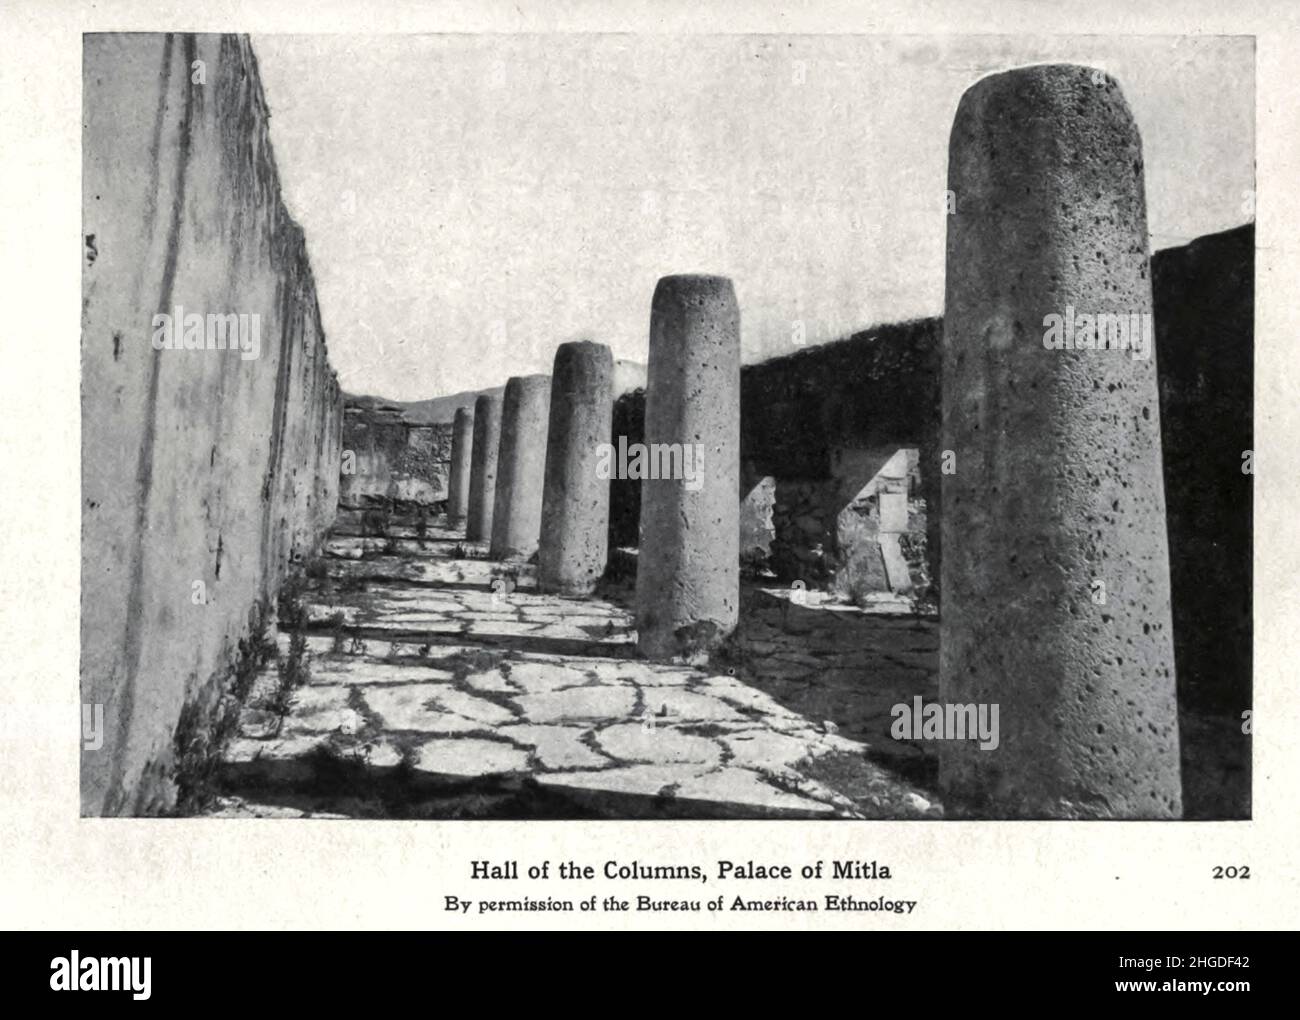 Hall of Columns Great Palace of Mitla aus dem Buch "Myths and Legends Mexico and Peru" von Lewis Spence, Herausgeber Boston : David D. Nickerson 1913 Stockfoto